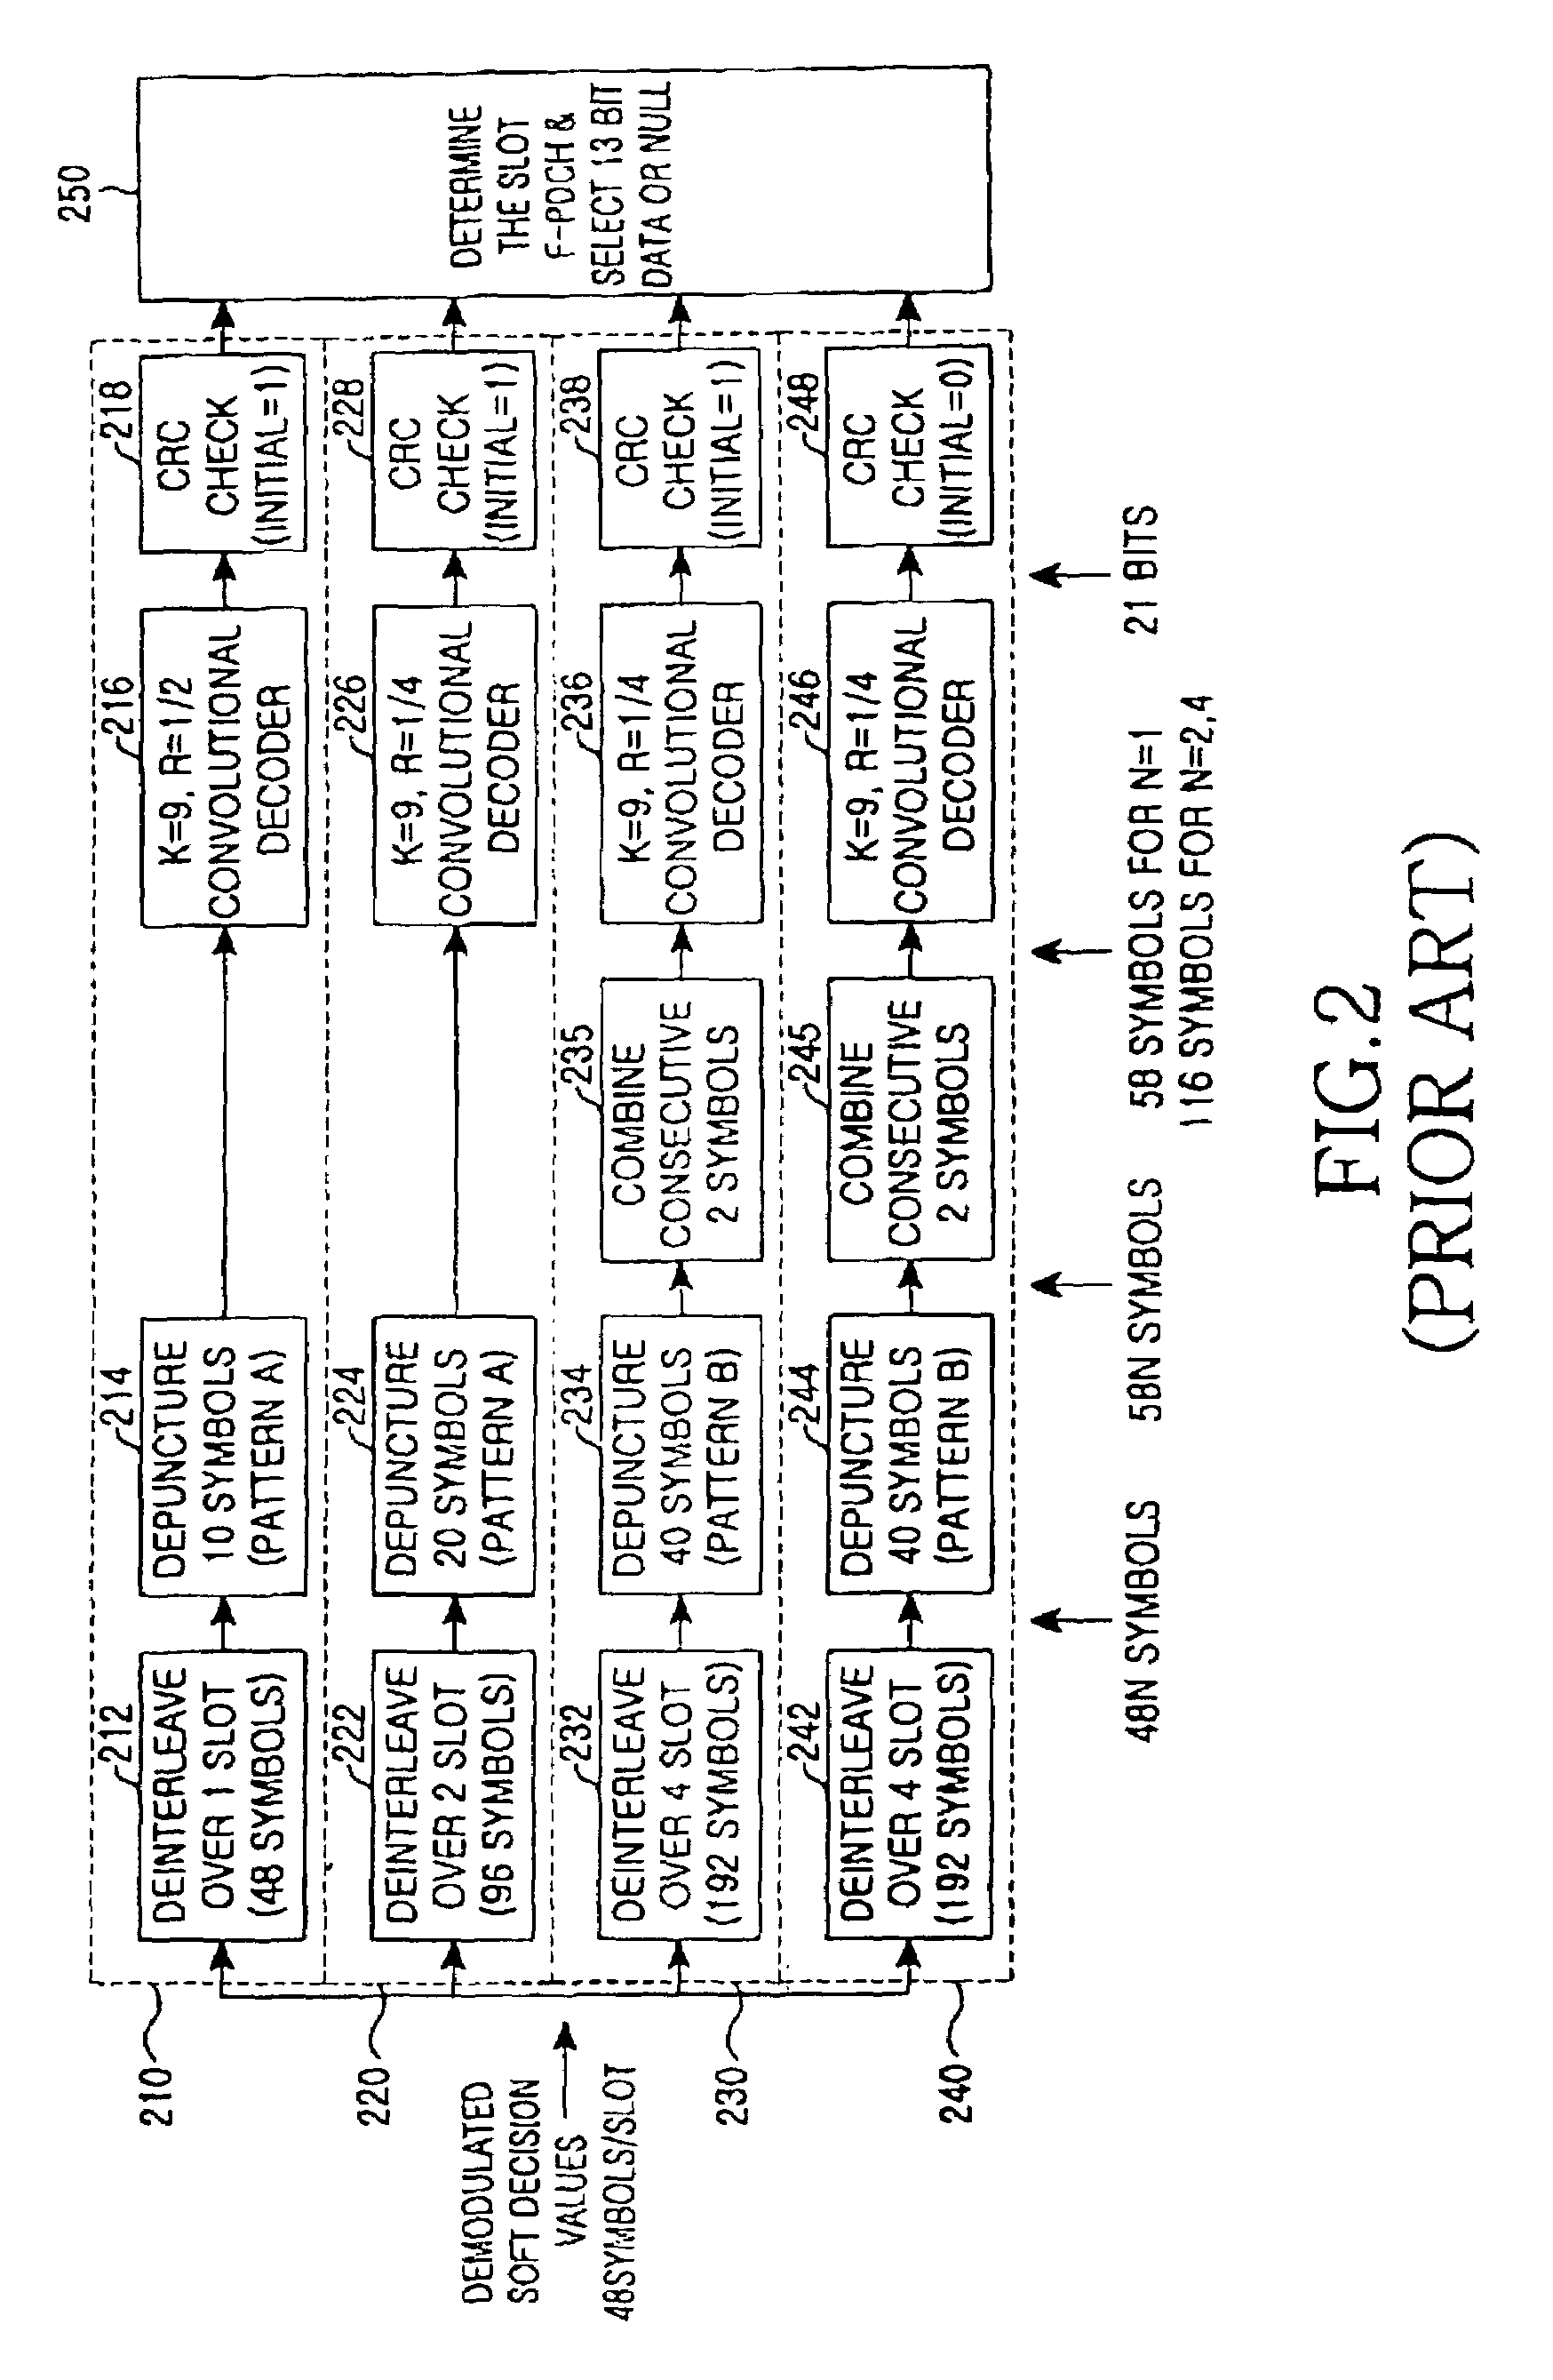 Apparatus for transmitting/receiving data on packet data control channel in a communication system